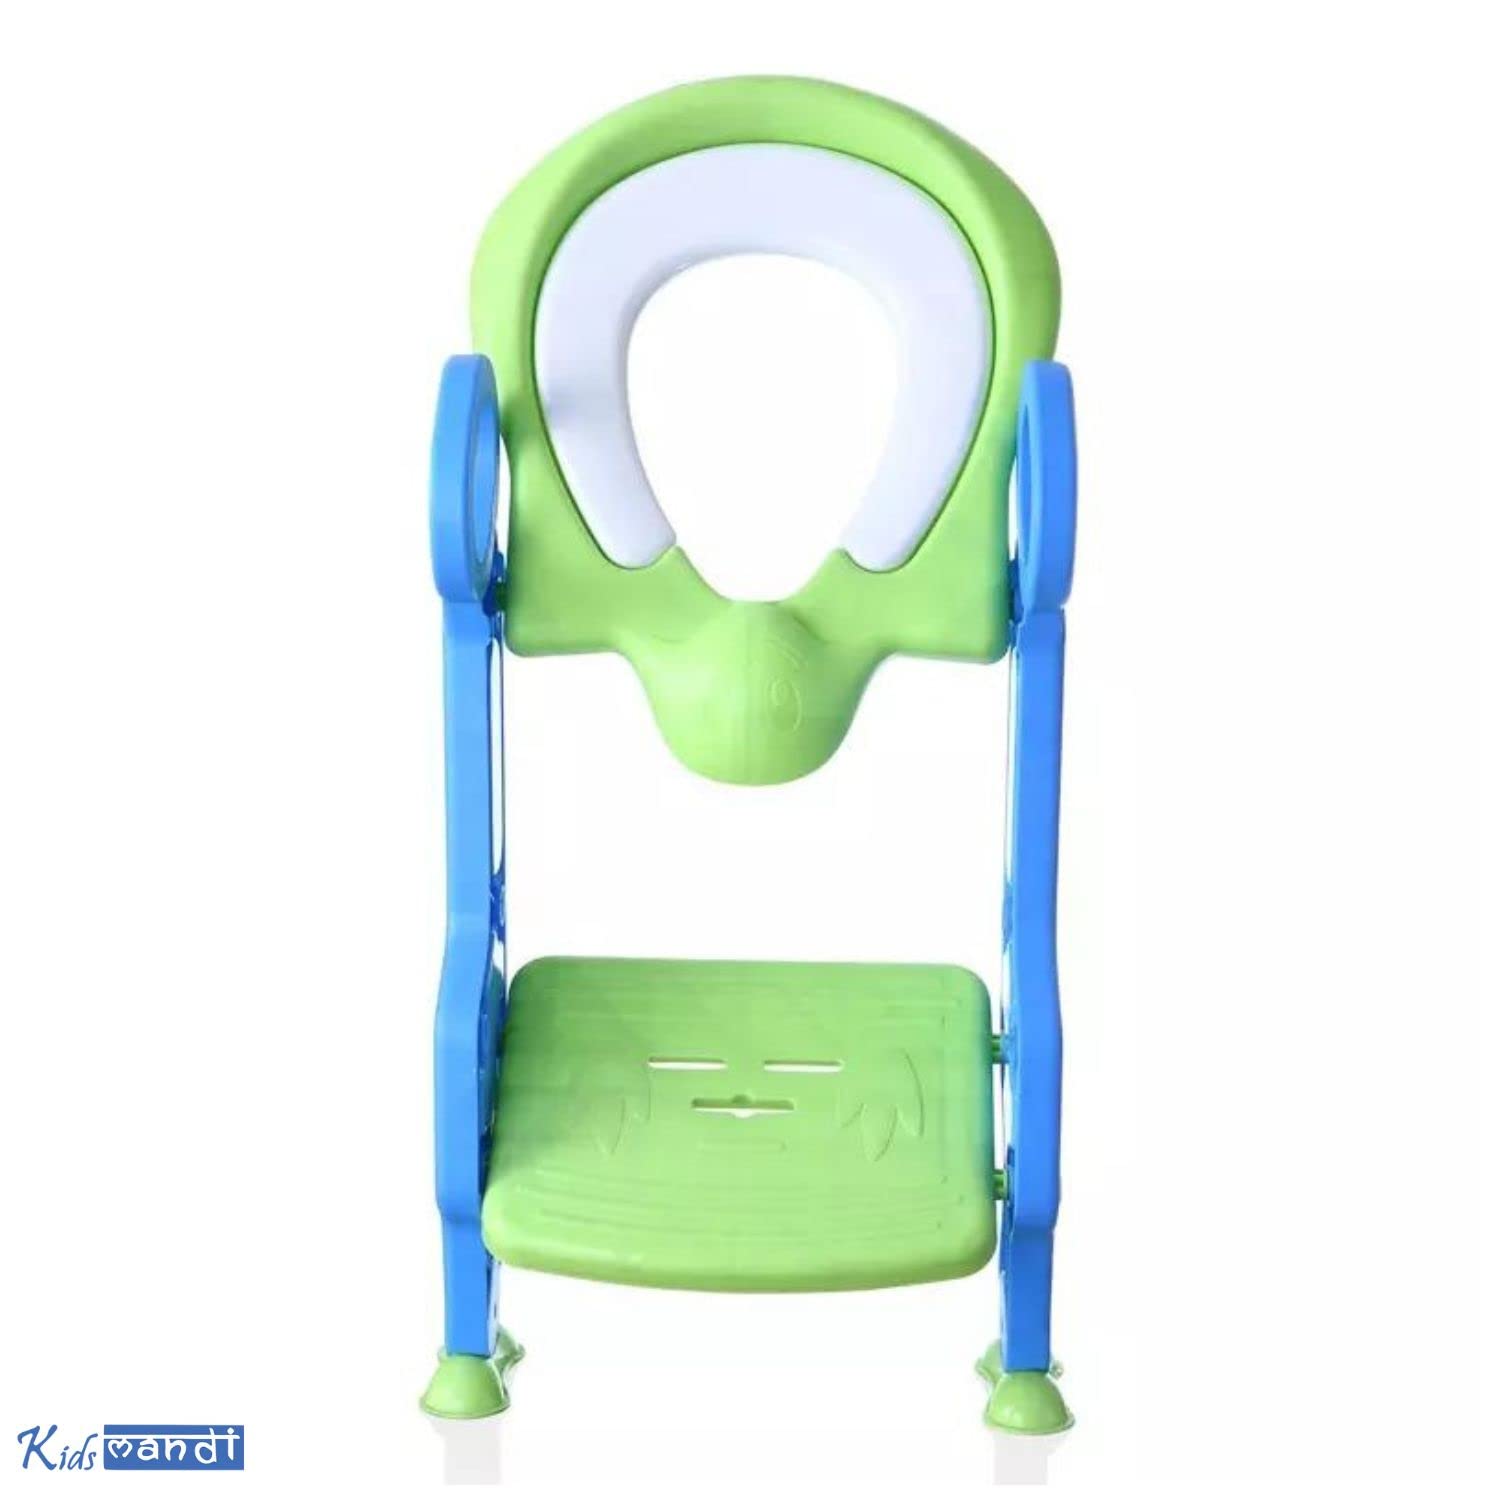 KIDS MANDI potty trainer with safe handrails for toddlers.